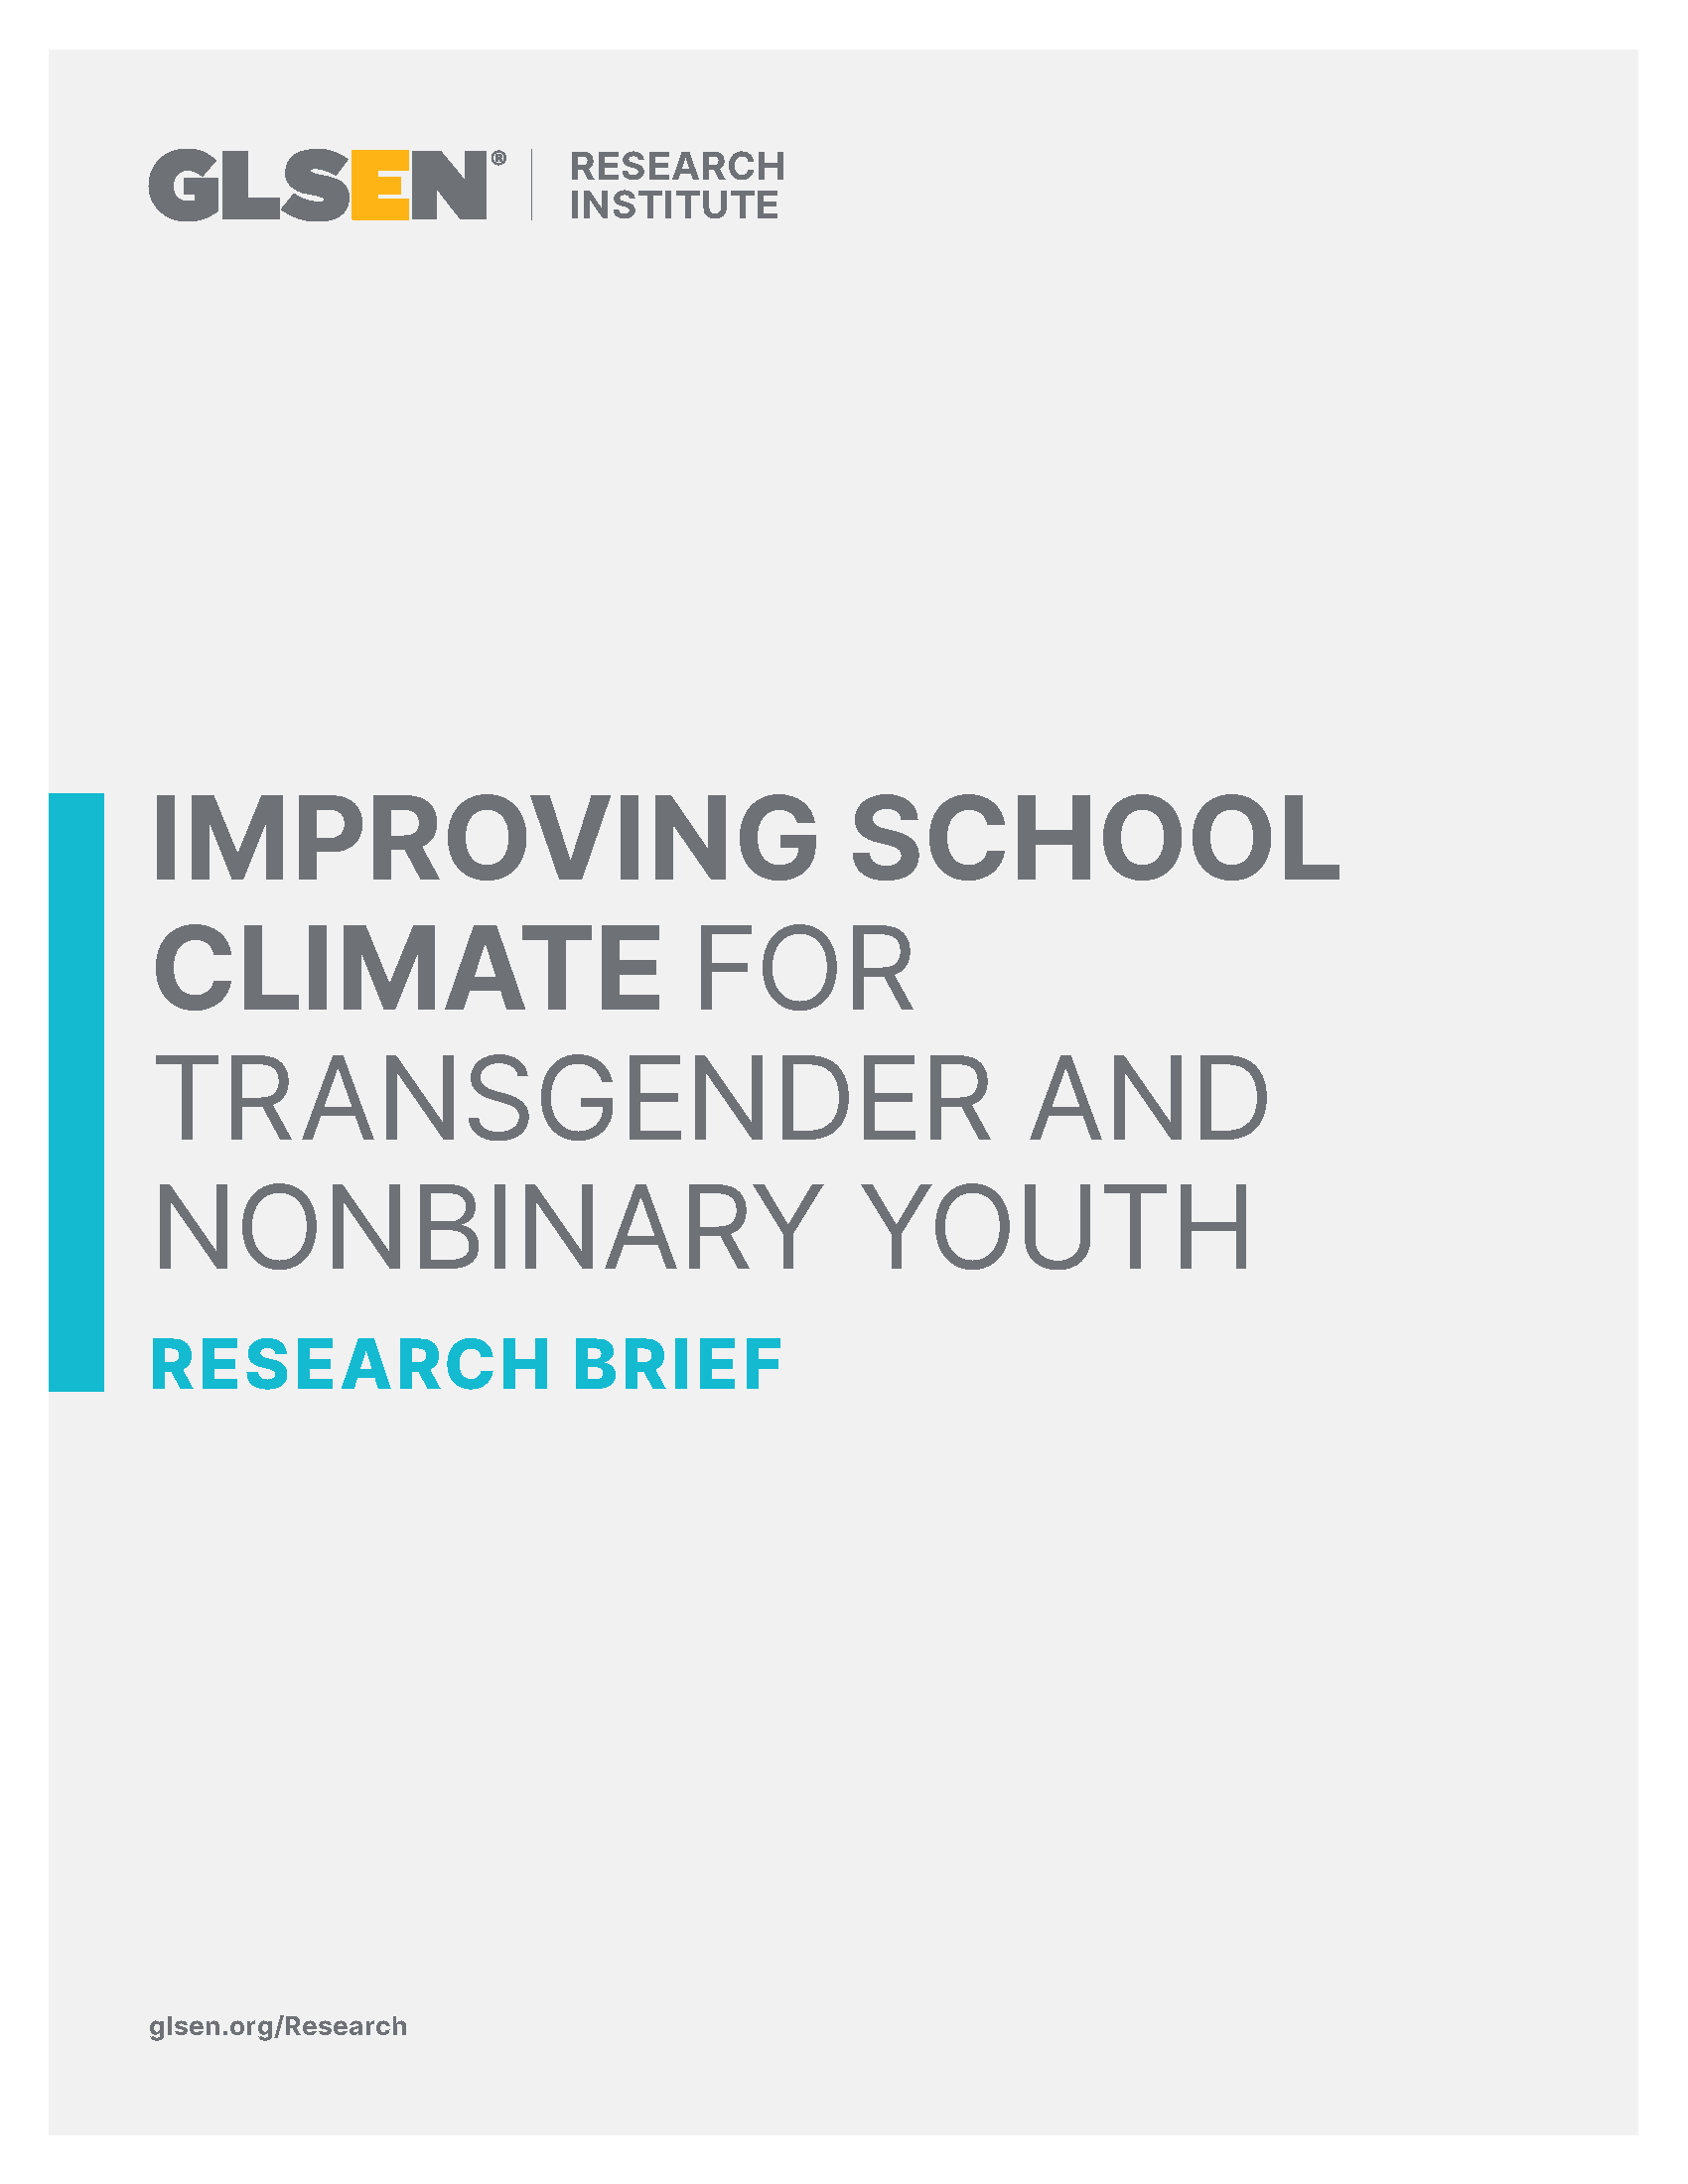 GLSEN Research Institute logo. Text says: IMPROVING SCHOOL CLIMATE FOR TRANSGENDER AND NONBINARY YOUTH RESEARCH BRIEF